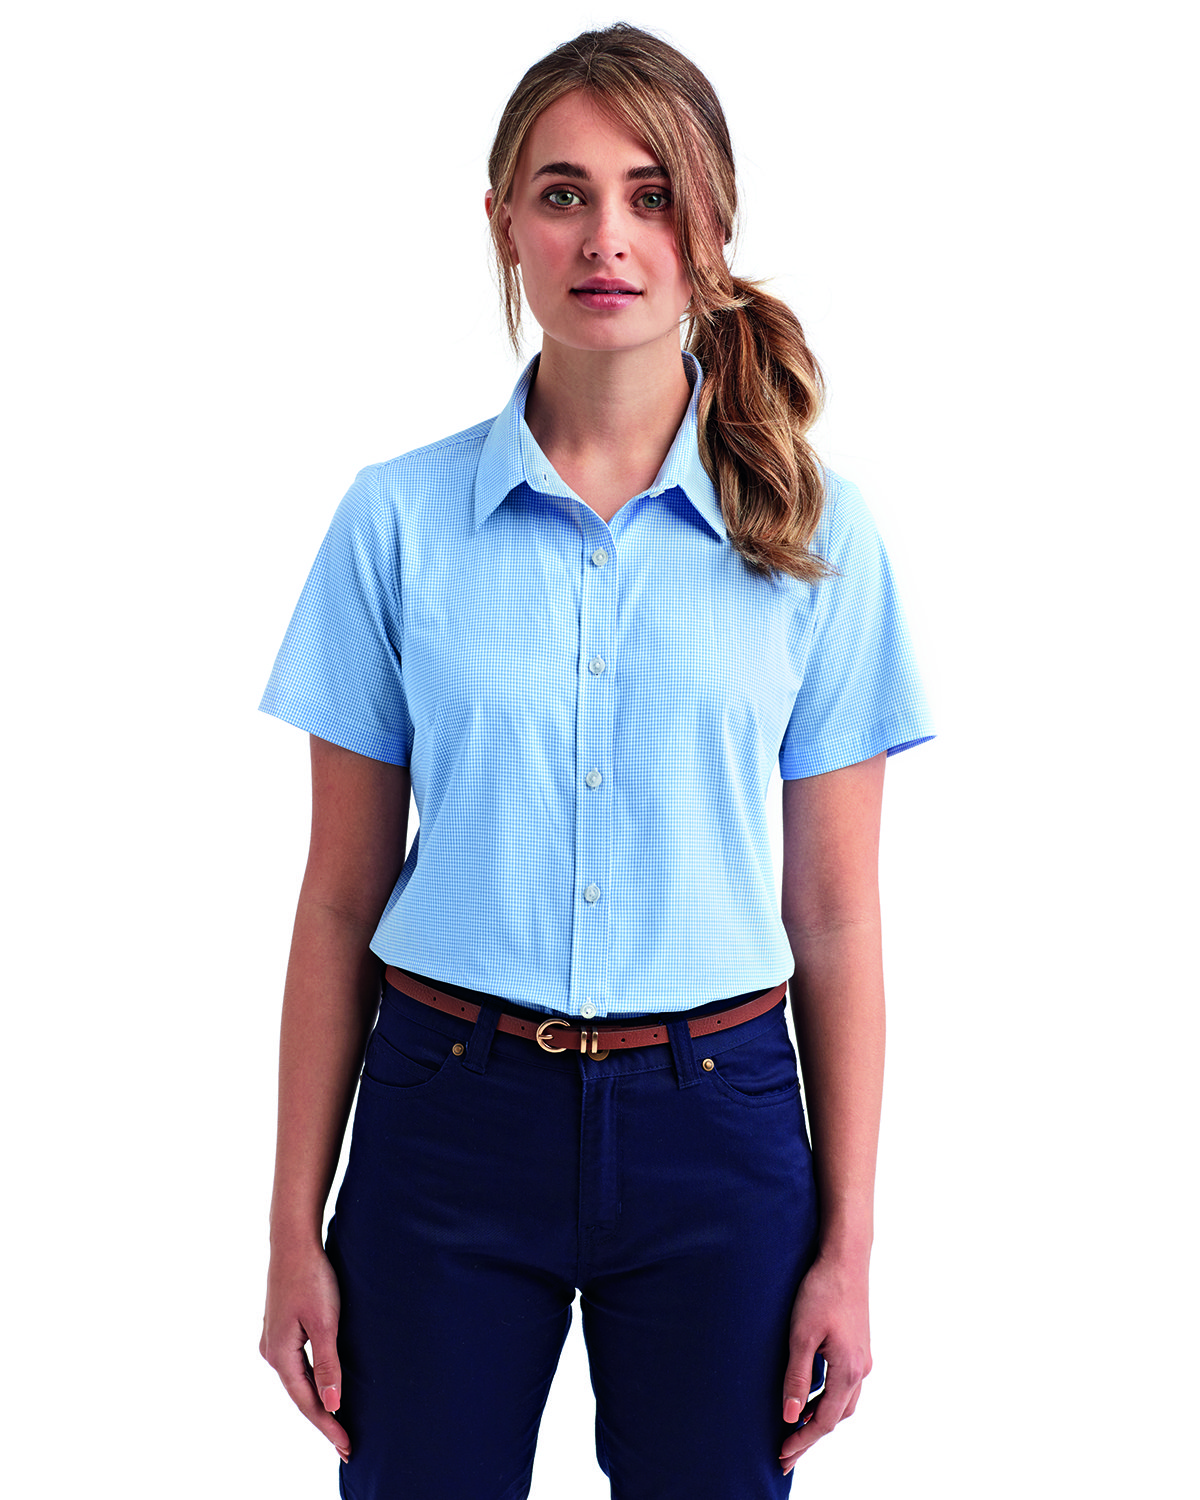 Ladies Microcheck Gingham Short-Sleeve Cotton Shirt-Artisan Collection by Reprime